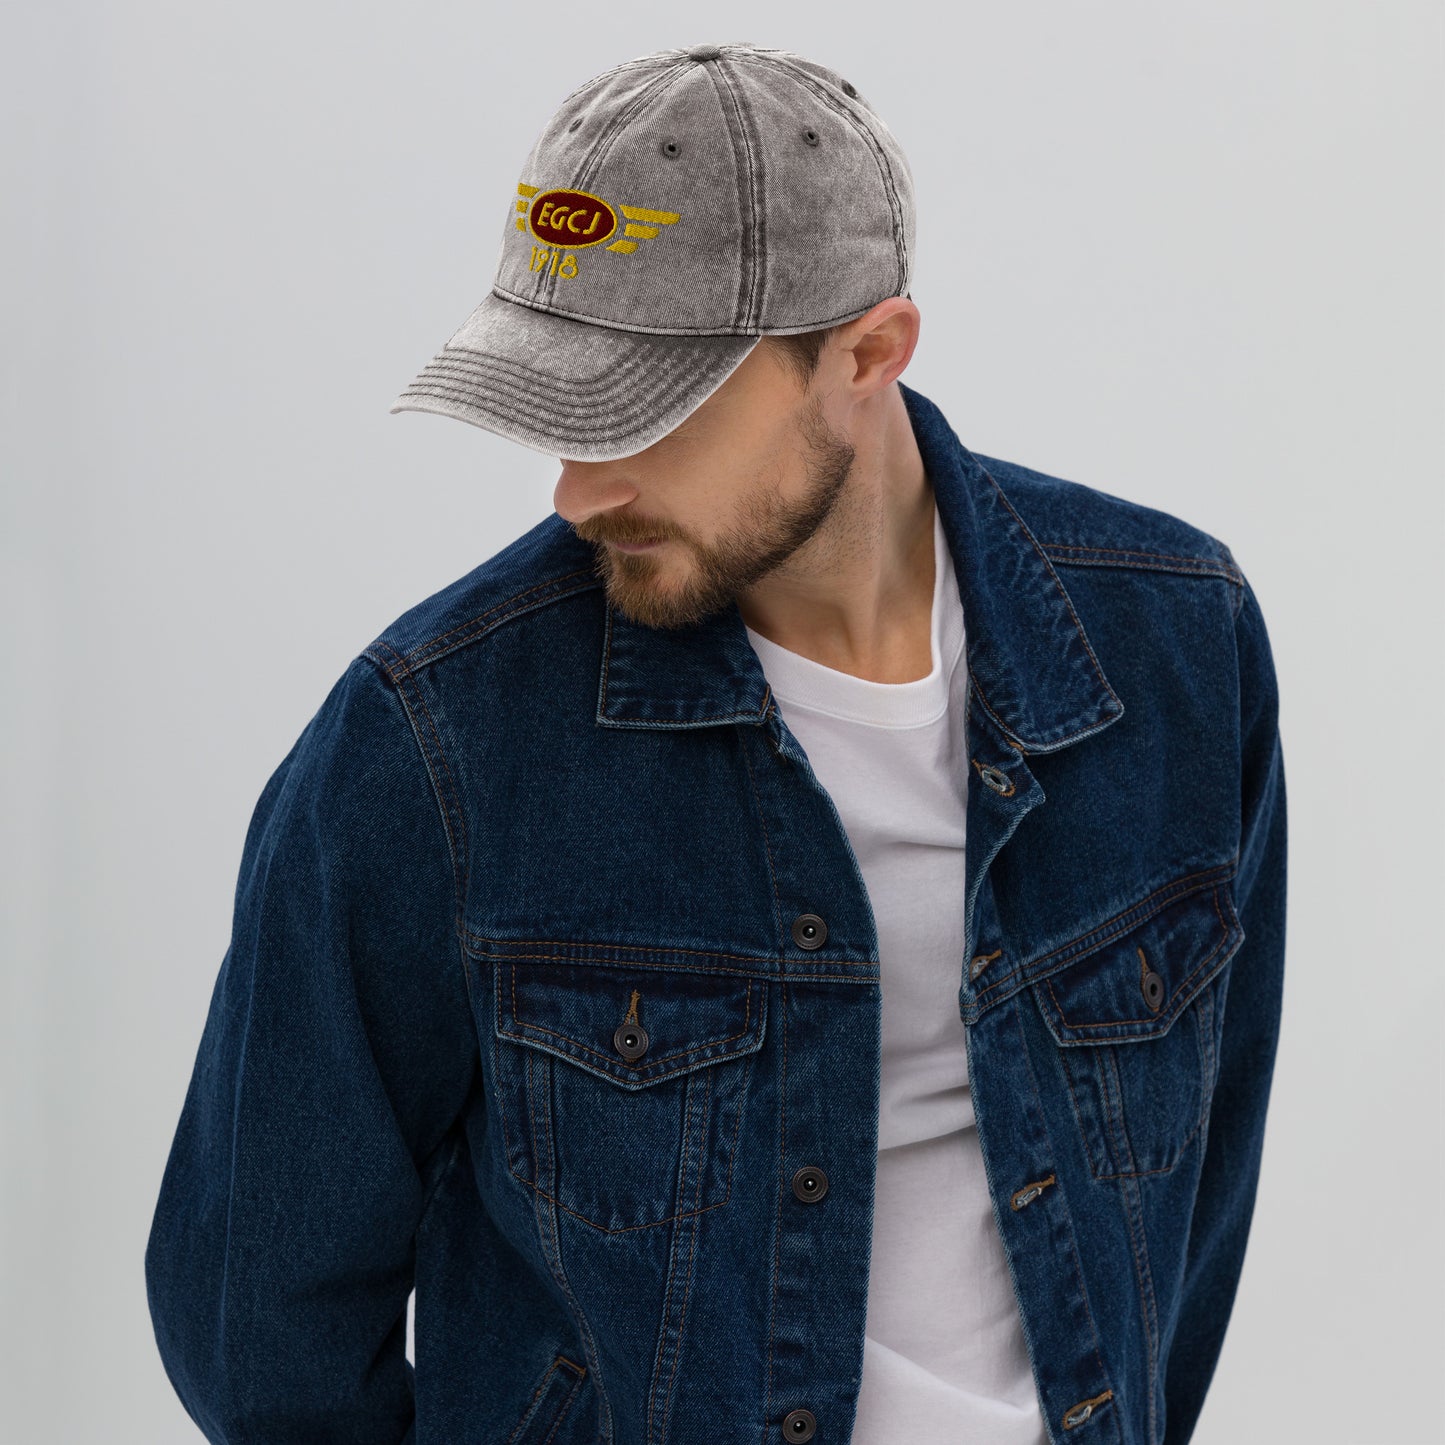 Sherburn Airfield vintage cotton twill baseball cap with embroidered ICAO code.